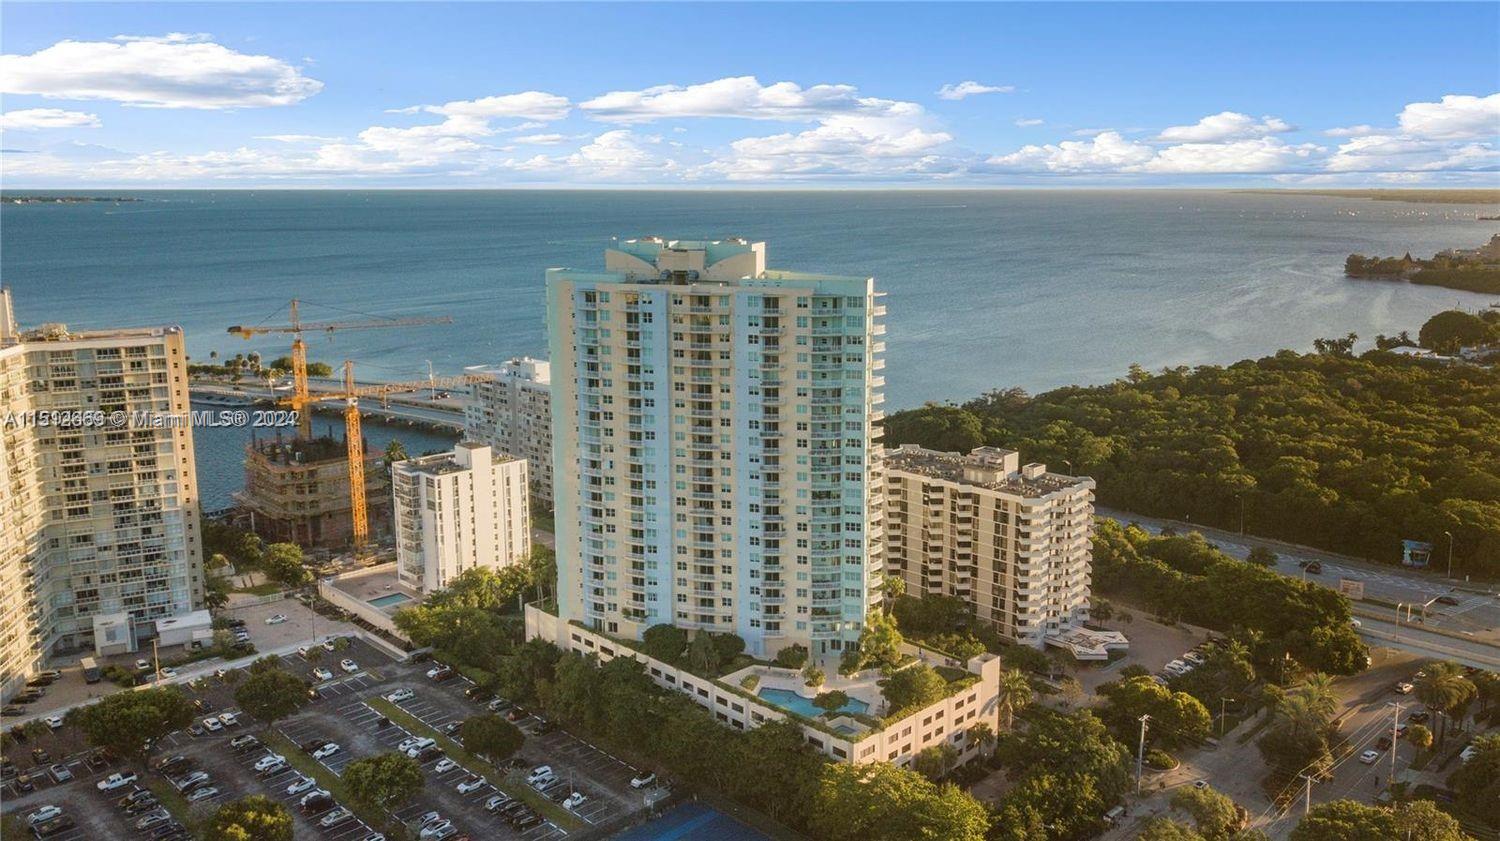 Imagine living in the heart of Miami's vibrant lifestyle at condo #1606. Just blocks away, you have access to beautiful parks and the stunning Key Biscayne beaches, where you can enjoy sailing, jet-skiing, running, biking, and simply relaxing by the water.
Modern and newly remodeled 2/2 condo at the Metropolitan!
 *Urban living without the traffic*
Beautiful condo 1606 features: New floor, popcorn ceiling removed, ceiling lights, cabinets, appliances, counter-tops, smoke detectors, bathroom trimmings, vanities, blackout blinds, new Bosch AC, *2 assigned/covered parking 512/513*, storage, Free Valet .  Its location places residents of the building just a few blocks from the Alice Wainwright Park, US1, I95 Highway and South Bayshore Dr.